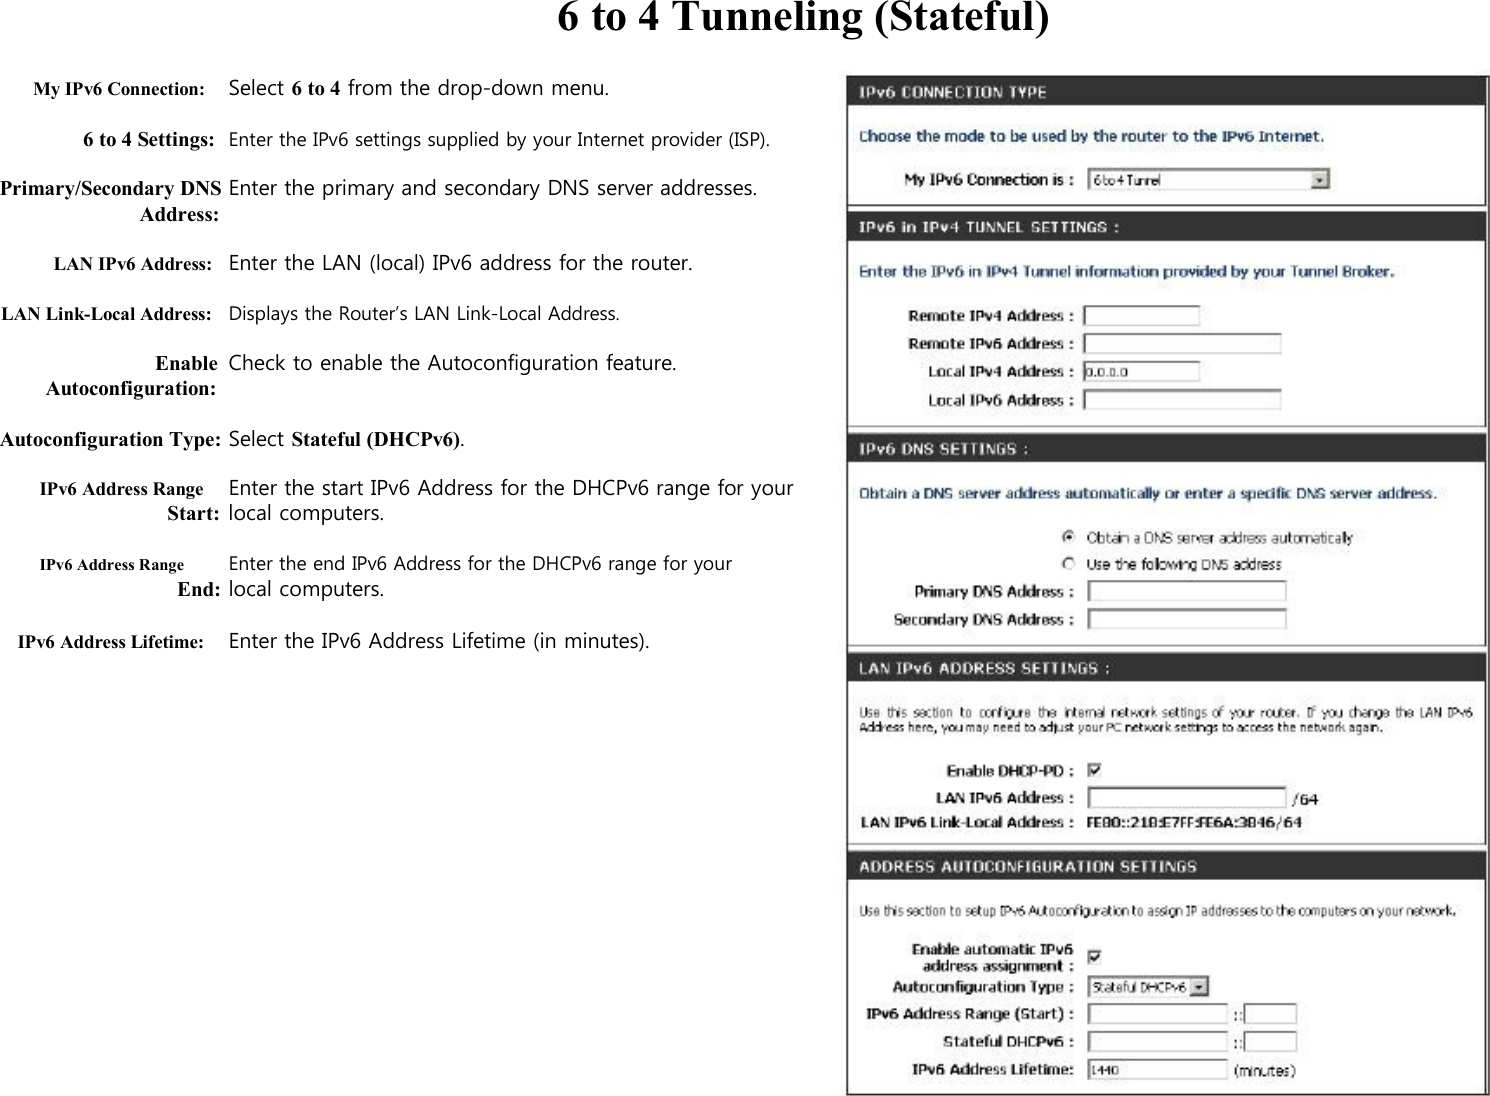  6 to 4 Tunneling (Stateful)  My IPv6 Connection: Select 6 to 4 from the drop-down menu.  6 to 4 Settings: Enter the IPv6 settings supplied by your Internet provider (ISP).  Primary/Secondary DNS Enter the primary and secondary DNS server addresses. Address:  LAN IPv6 Address: Enter the LAN (local) IPv6 address for the router.  LAN Link-Local Address: Displays the Router’s LAN Link-Local Address.  Enable Check to enable the Autoconfiguration feature. Autoconfiguration:  Autoconfiguration Type: Select Stateful (DHCPv6).  IPv6 Address Range Enter the start IPv6 Address for the DHCPv6 range for your   Start: local computers.  IPv6 Address Range Enter the end IPv6 Address for the DHCPv6 range for your End: local computers.  IPv6 Address Lifetime: Enter the IPv6 Address Lifetime (in minutes).                     